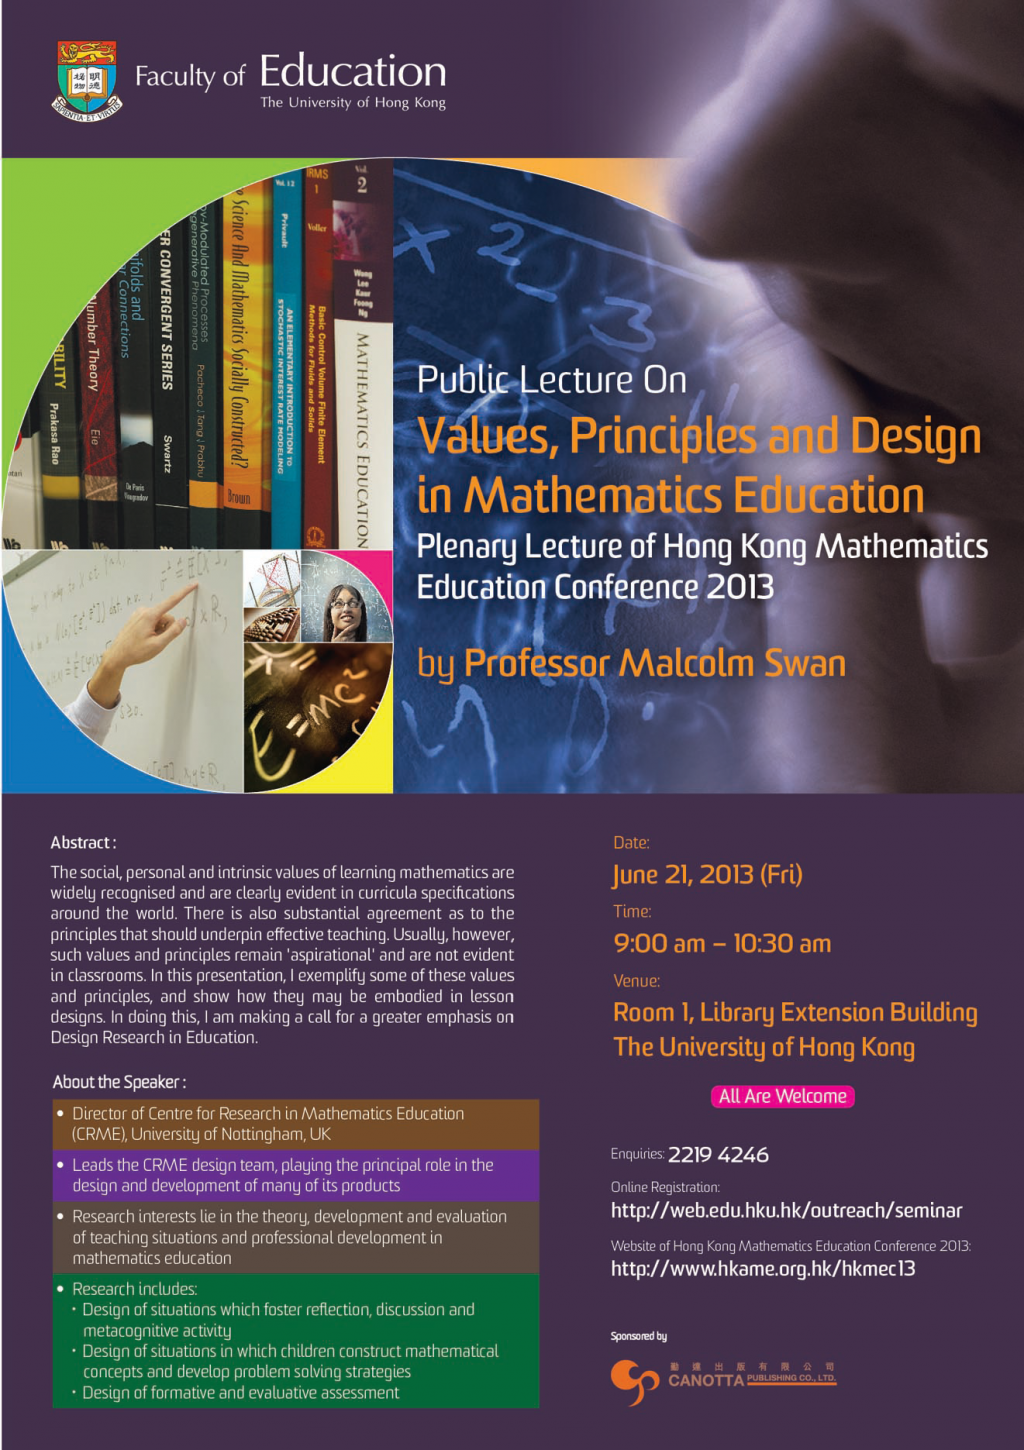 Public Lecture on Values, Principles and Design in Mathematics Education 